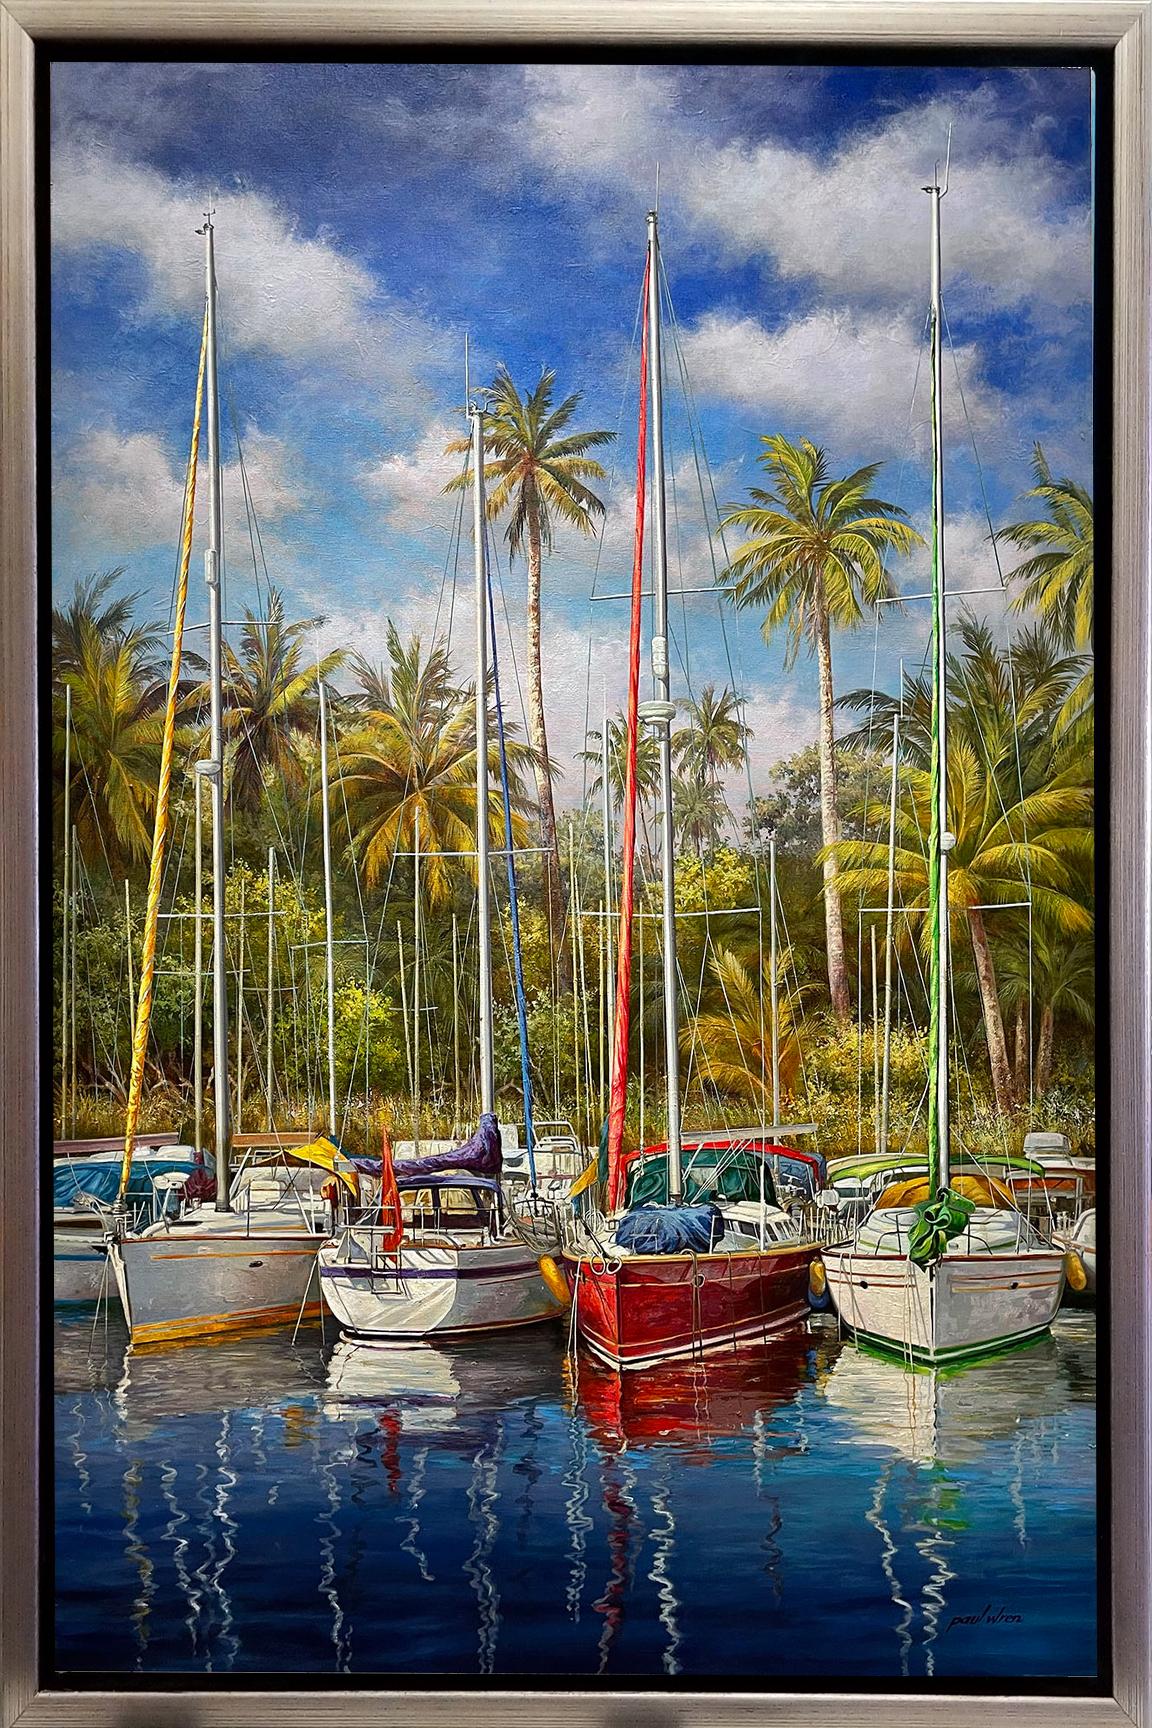 Artist: Paul Wren
Title: Tranquility Bay
Medium: Original oil on canvas
Signature: Hand signed by artist
Size: Approximately 42x62 inches
Framed: Framed.
Biography: Paul Wren was born on October 8, in Peru, in 1965. Middle child of a very large